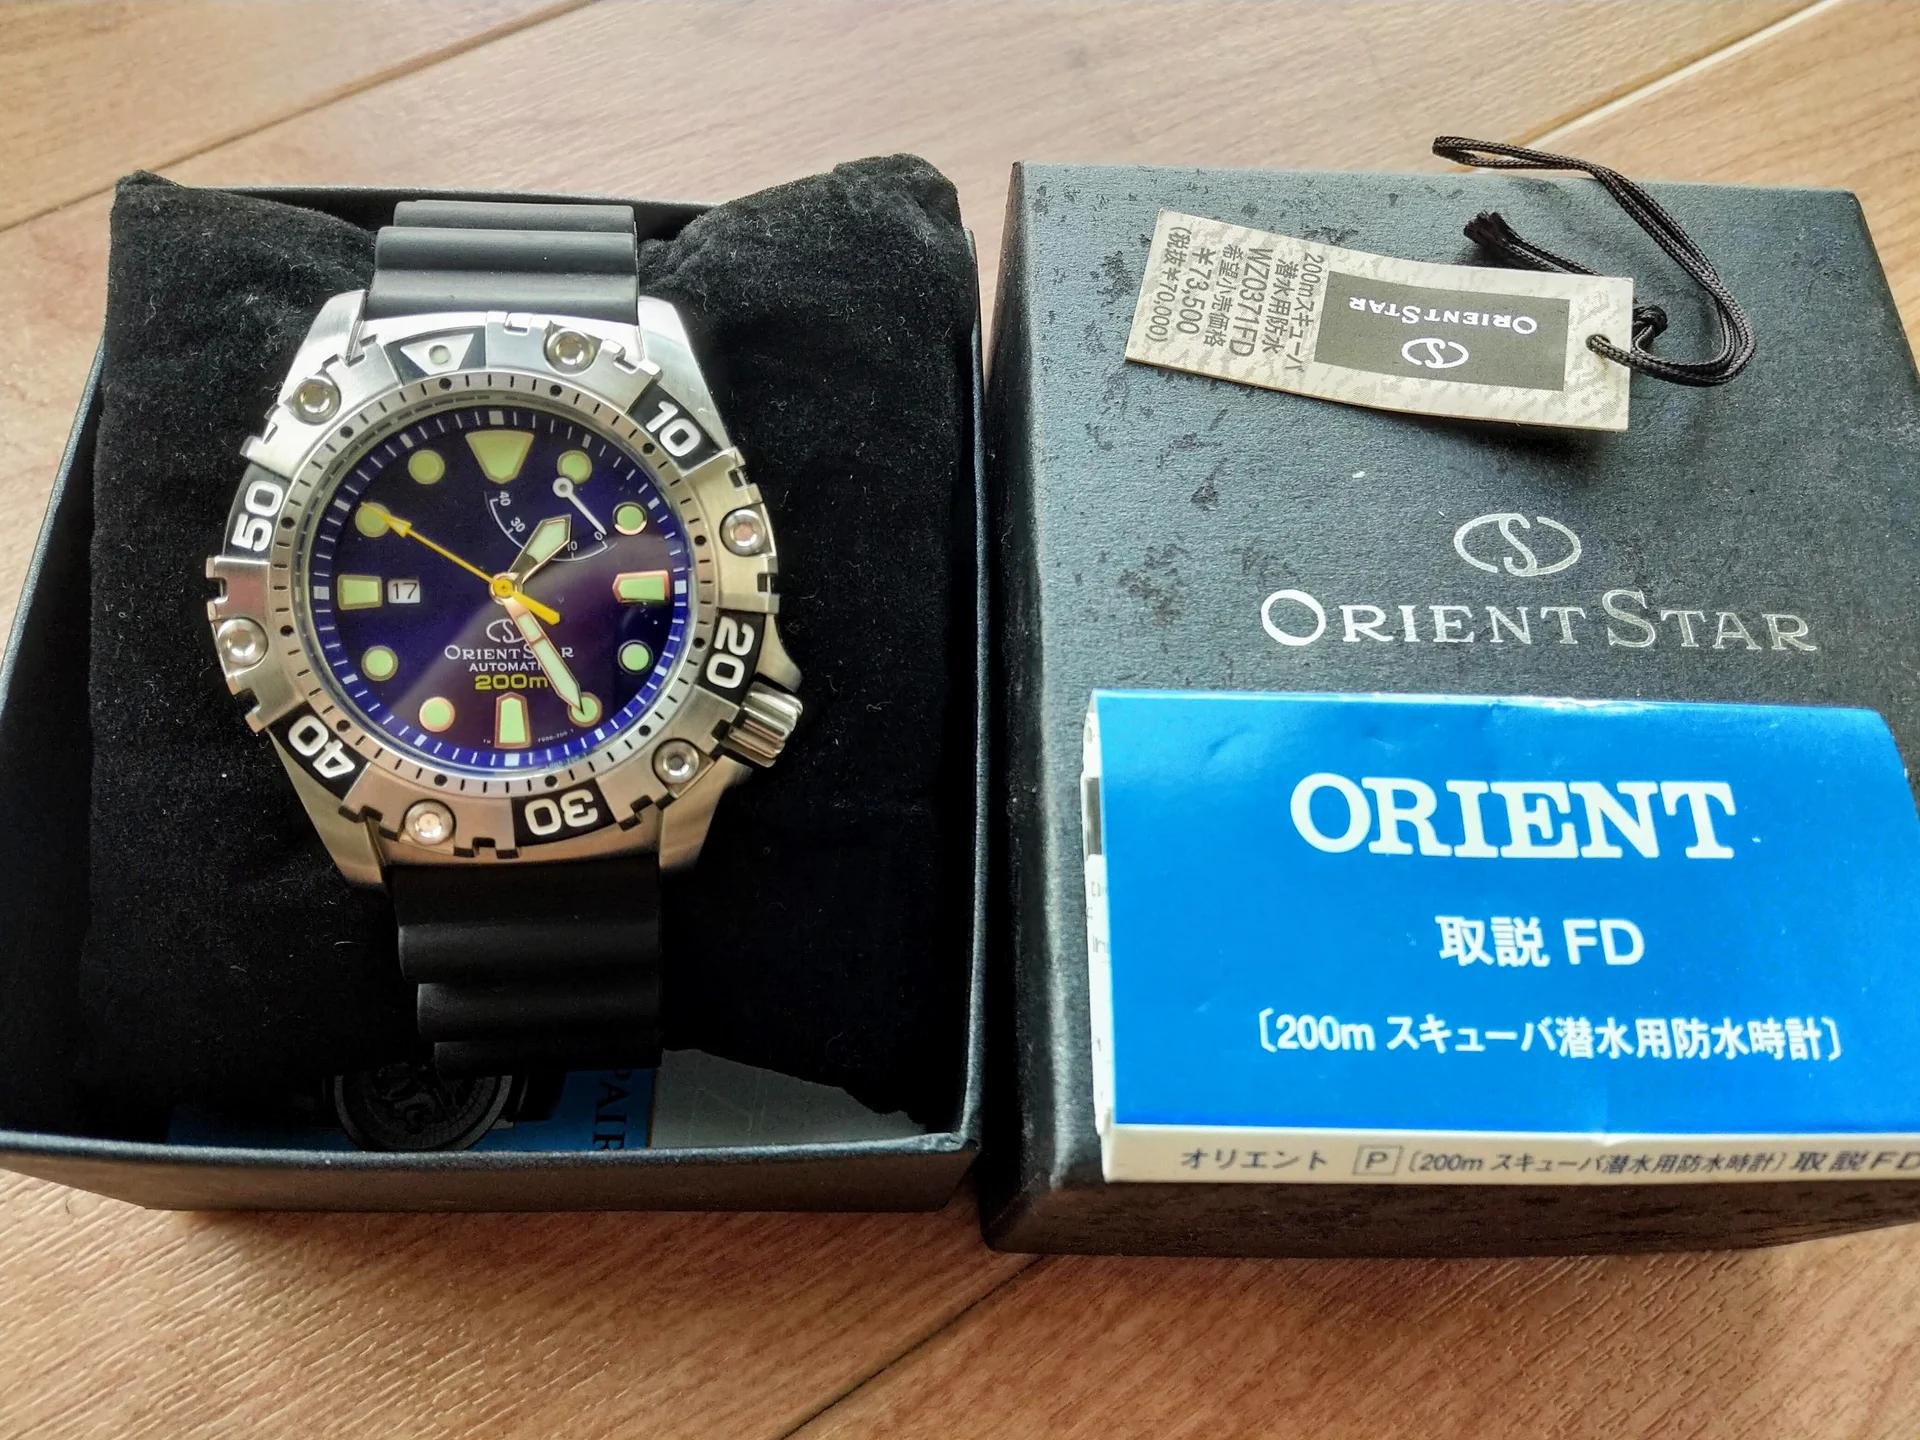 Orient Star エア・ダイバーズ200m WZ0371FD | camillevieraservices.com